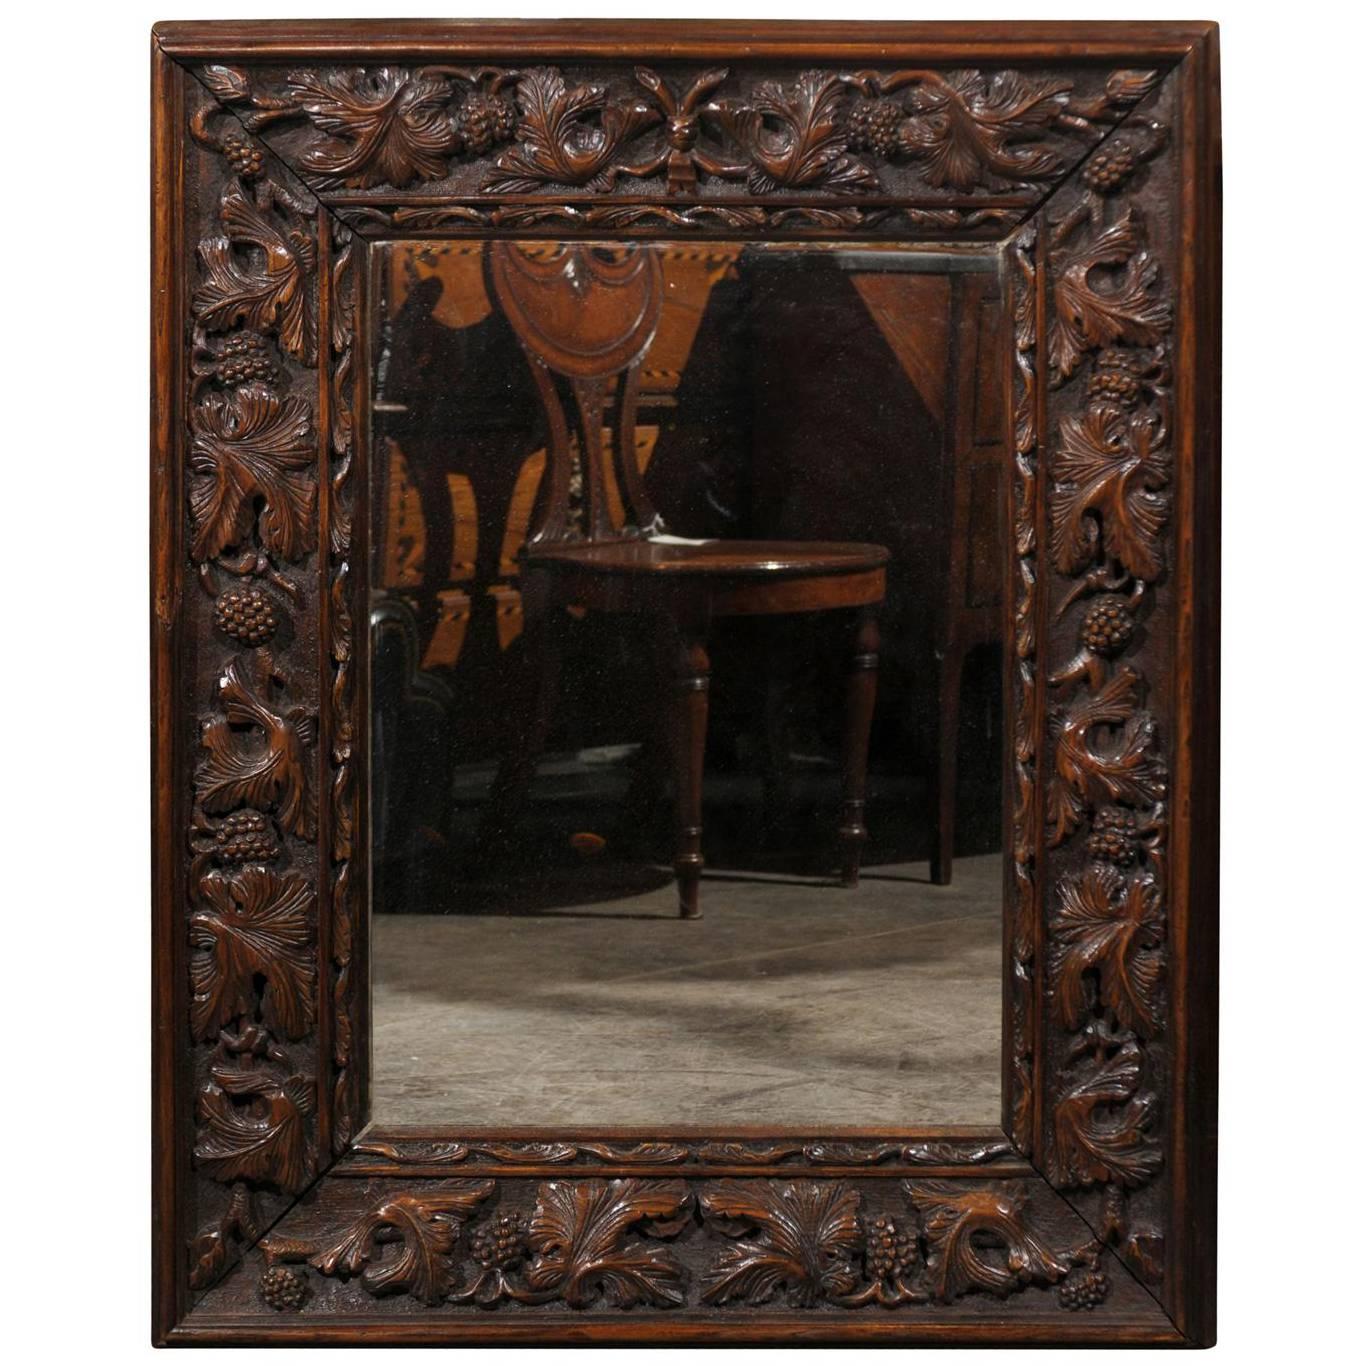 German Black Forest Carved Mirror with Foliage Motifs from the Late 19th Century